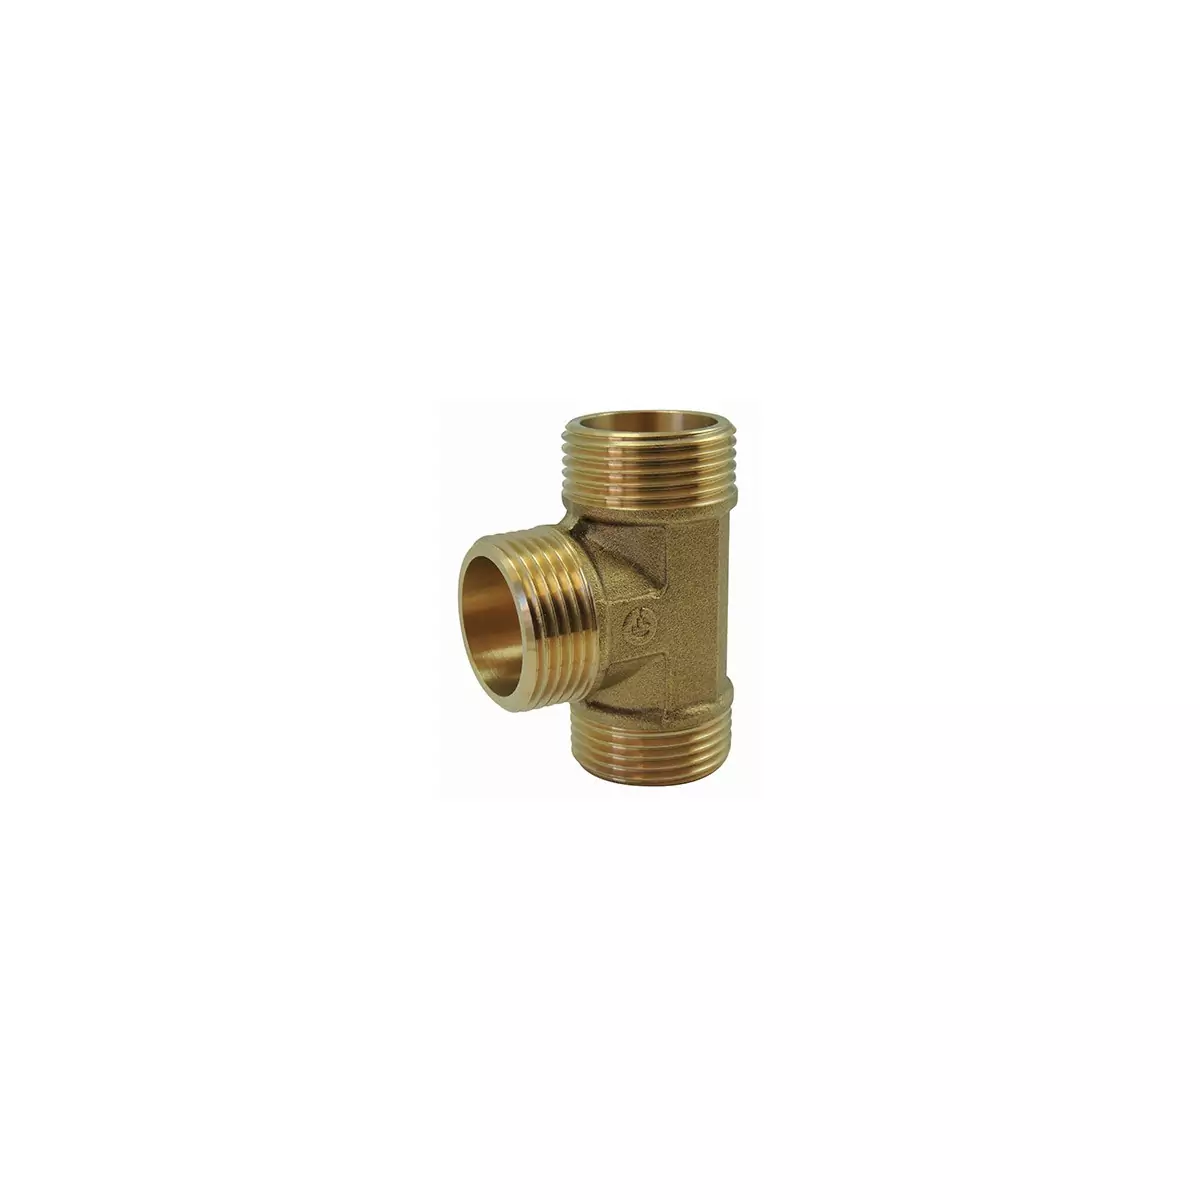 Screw-in brass fitting: Equal tee Male / Male / Male